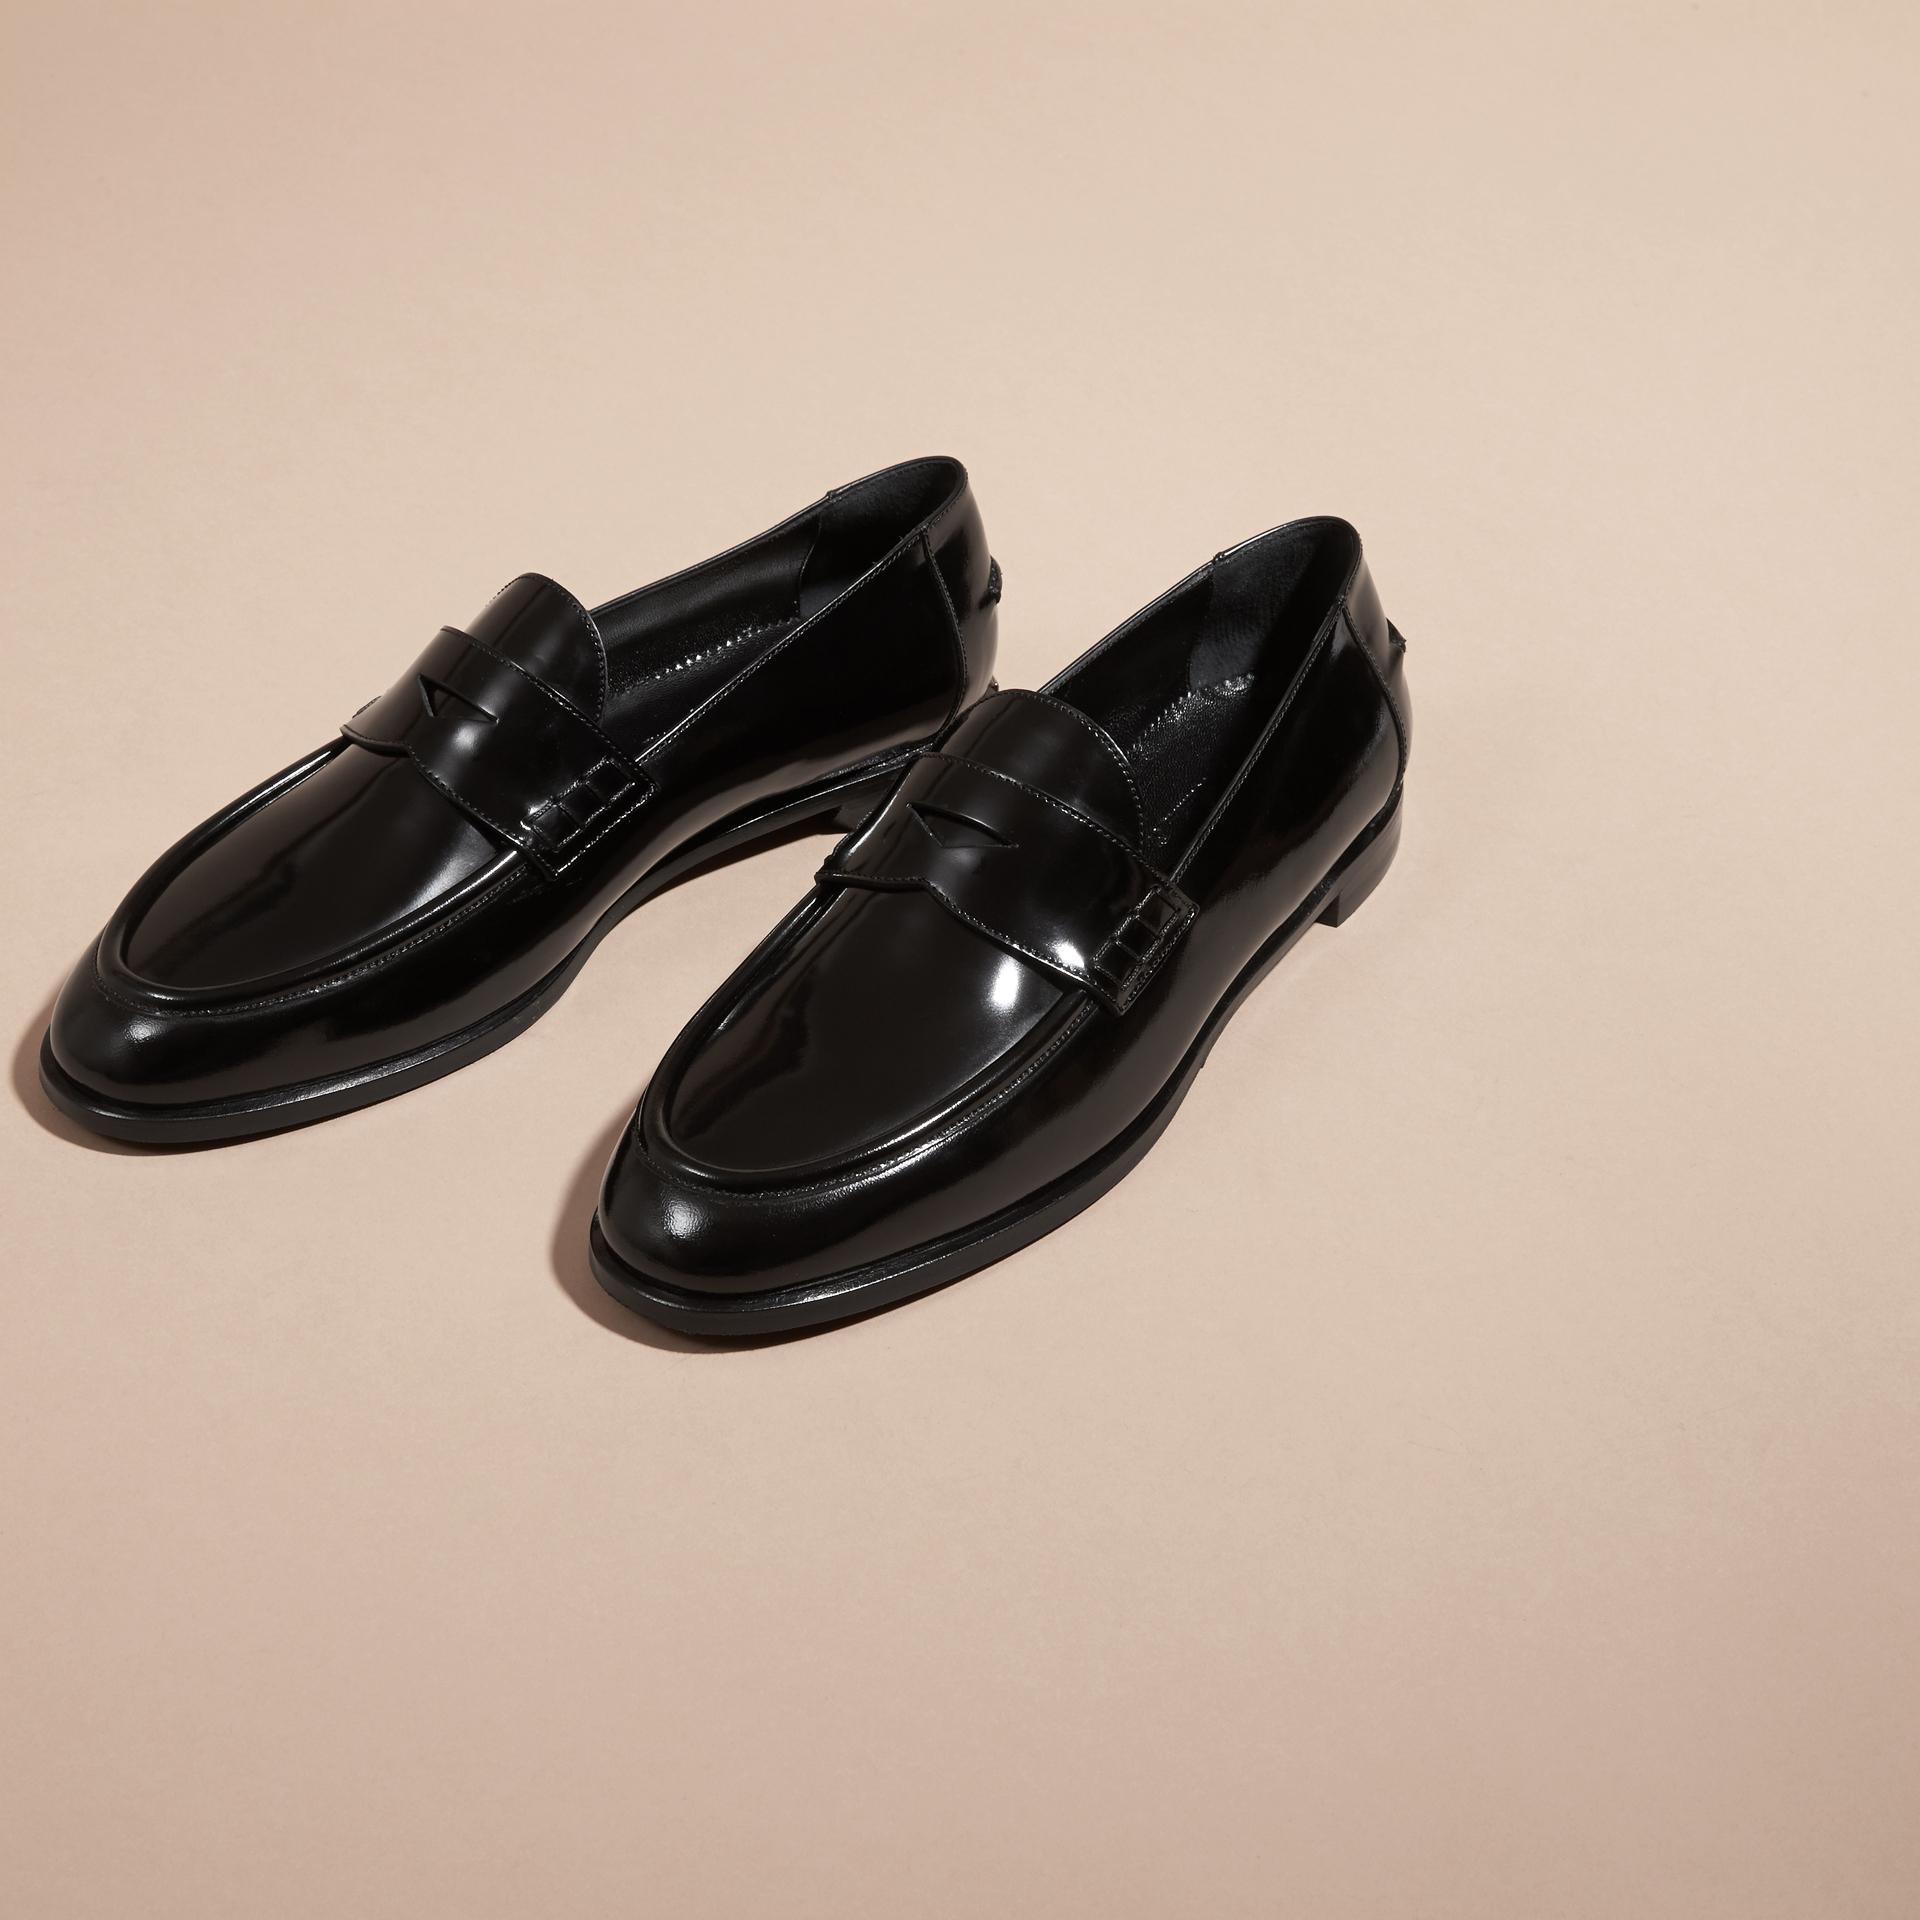 Lyst - Burberry Polished Leather Loafers in Black